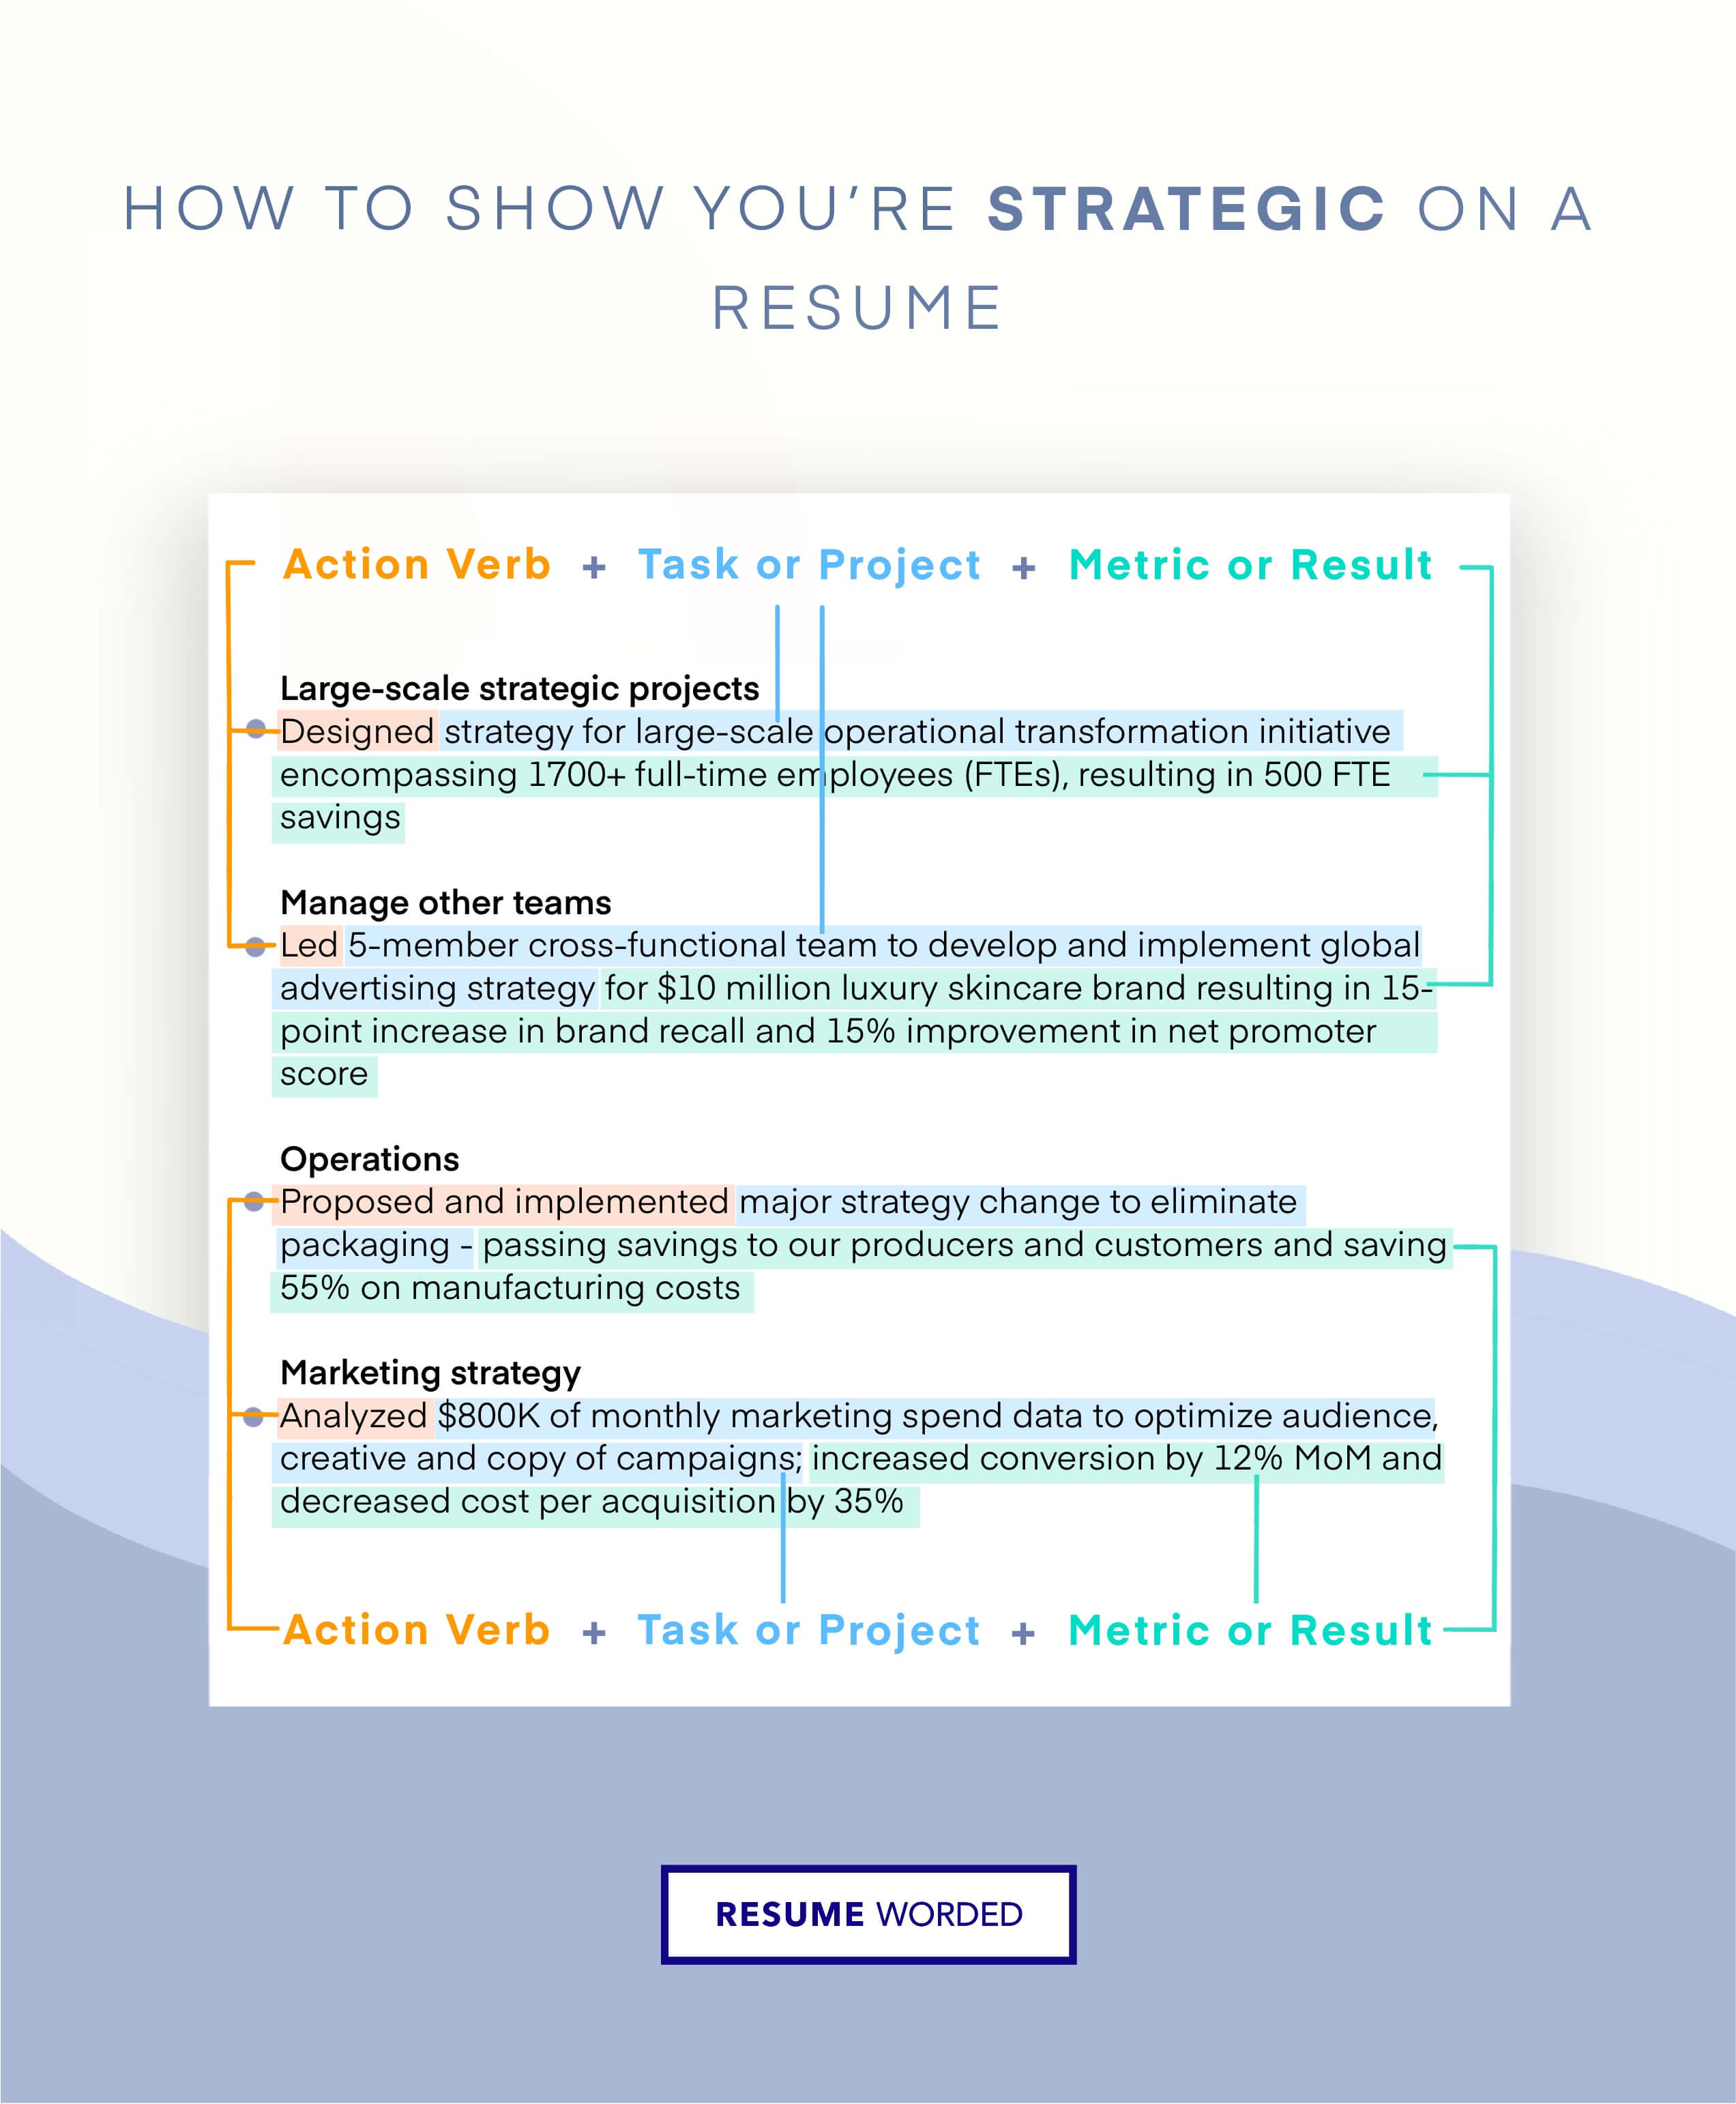 Show your strategic decision-making ability - Chief Security Officer  CV